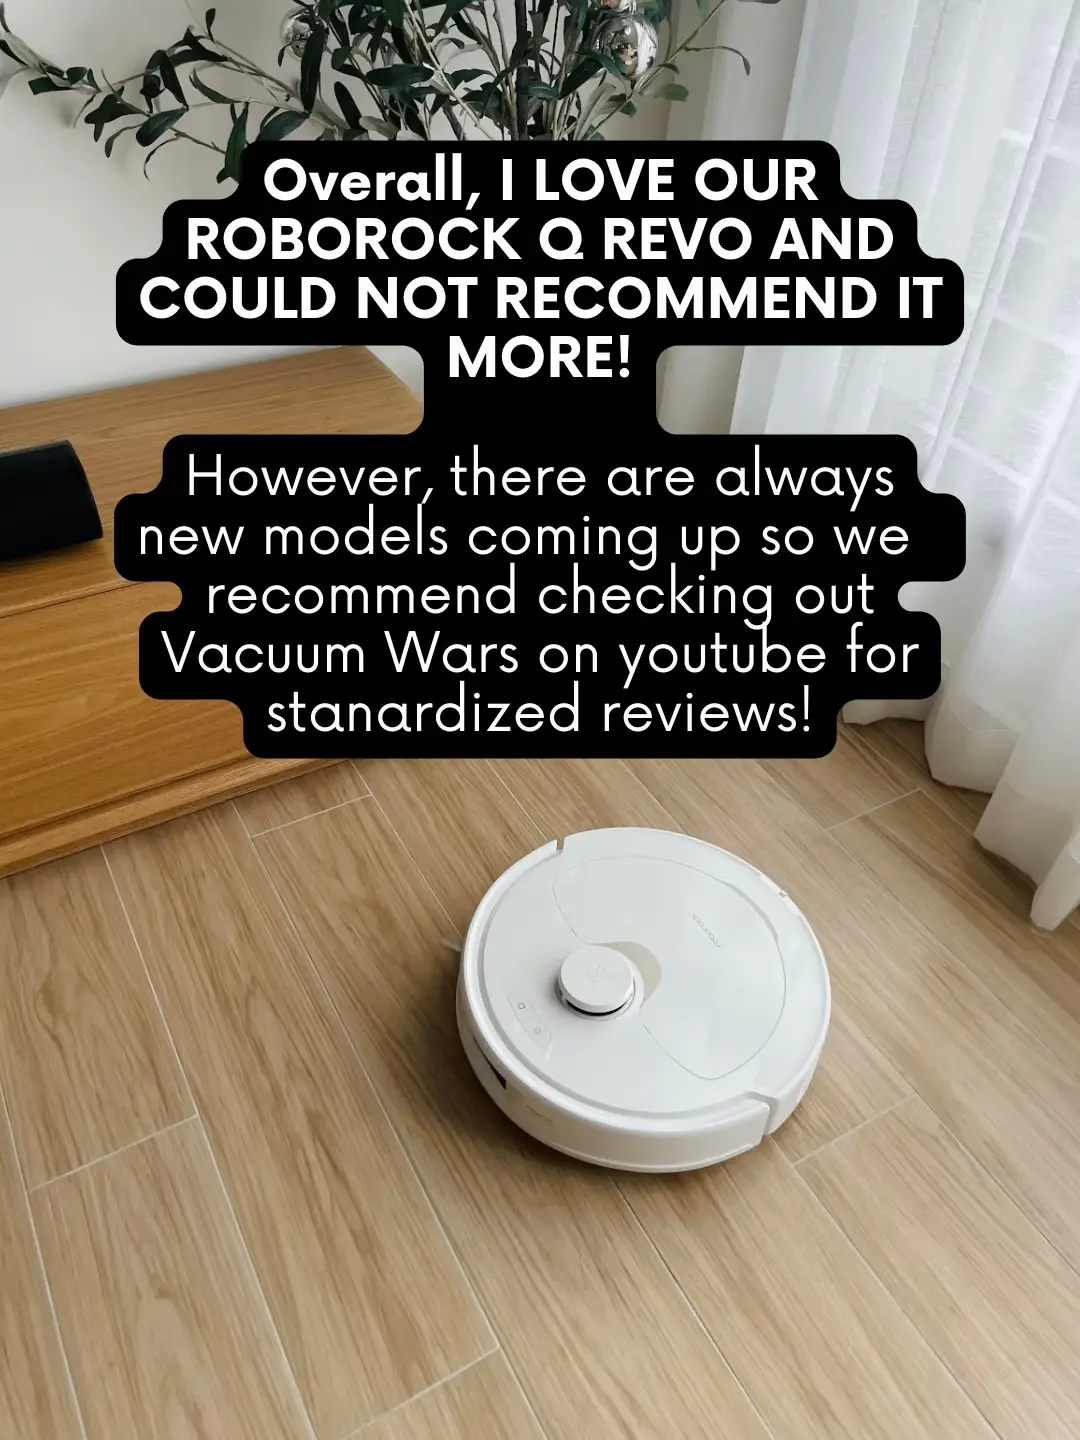 Why we chose the Roborock Q Revo 🧹🤩, Gallery posted by Suren & Lowen